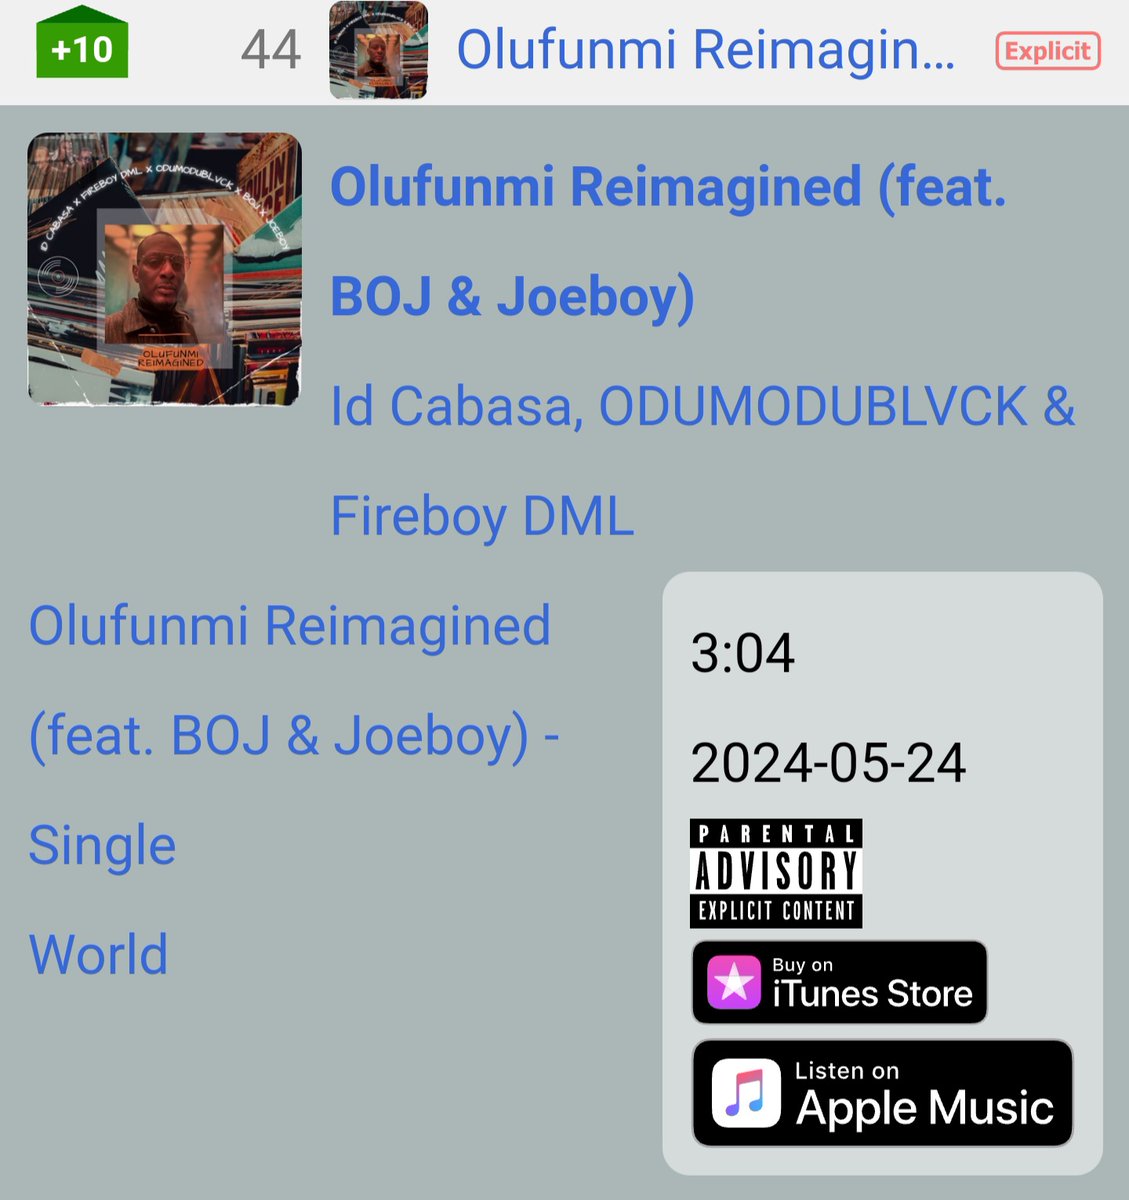 @Real_Idcabasa's Olufunmi Reimagined reaches a New peak #44 (+10) on NG Apple Music Top Songs Chart